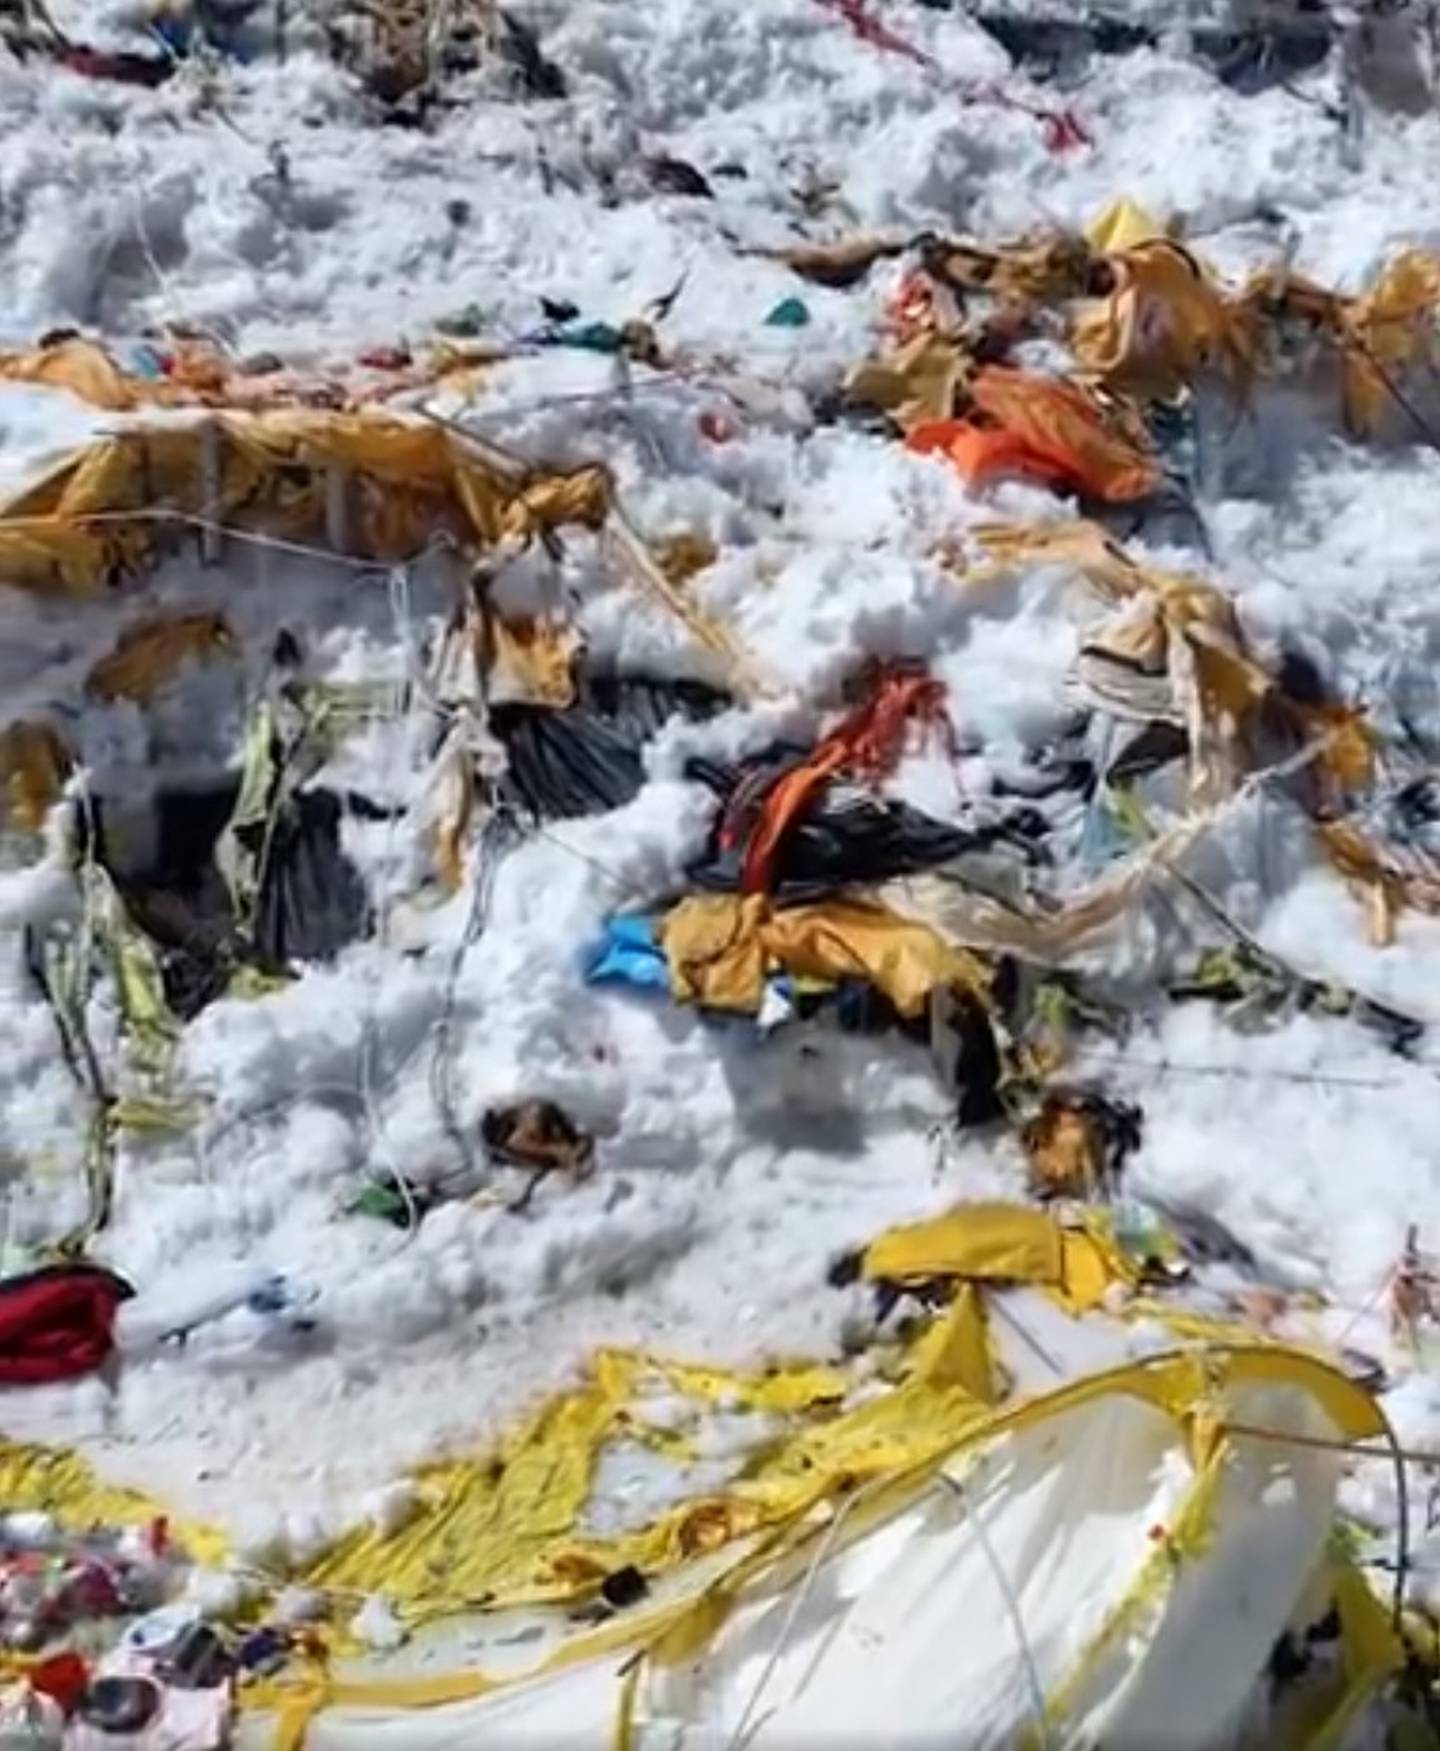 A screengrab from a video posted on Nimsdai Foundation's Facebook page shows the rubbish left behind on K2. Photo: Nimsdai Foundation